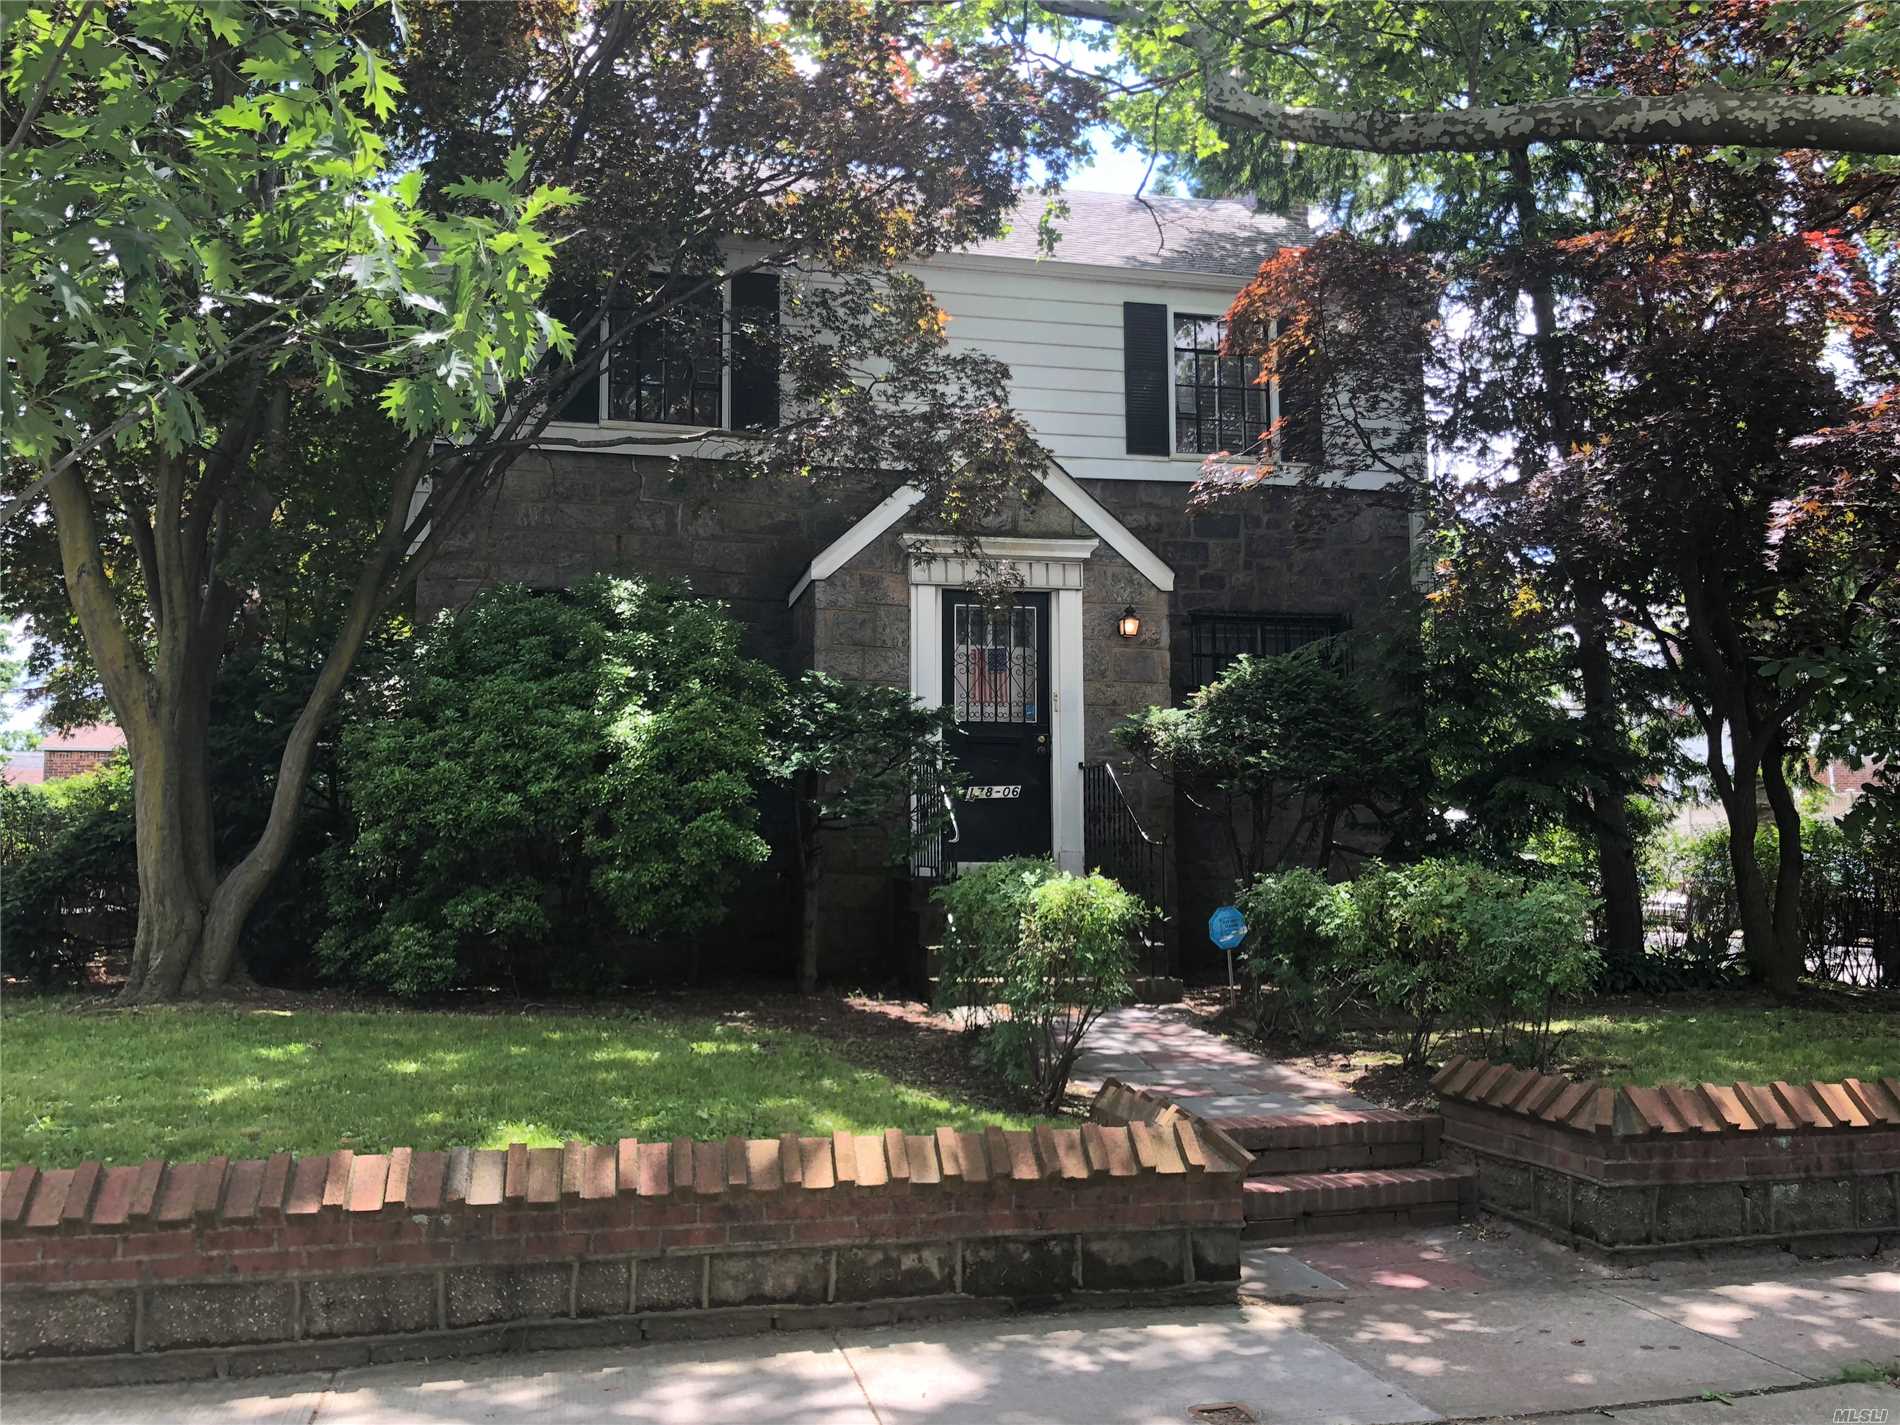 Bring Your Design And Decorating Ideas To This 5 Bedroom, 2.5 Bath Colonial And Create The Home Of Your Dreams. Ideally Located In The Heart Of Fresh Meadows, Close To The Express Bus To Manhattan, St. John's University, Major Highways And Shopping.